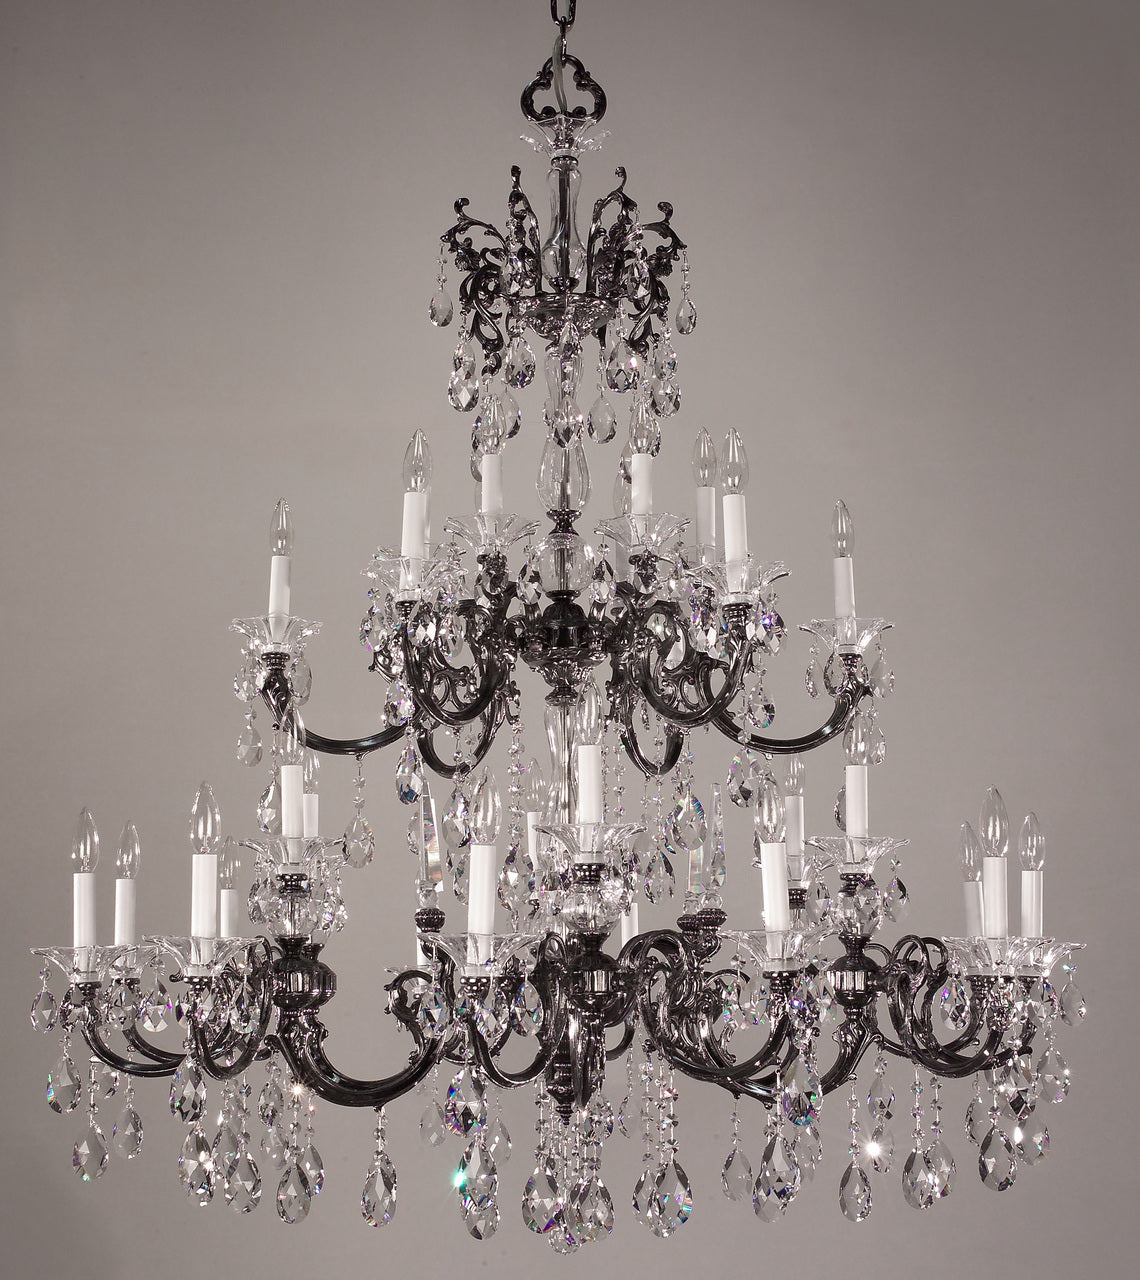 Classic Lighting 57060 G SC Via Lombardi Crystal Chandelier in 24k Gold (Imported from Spain)